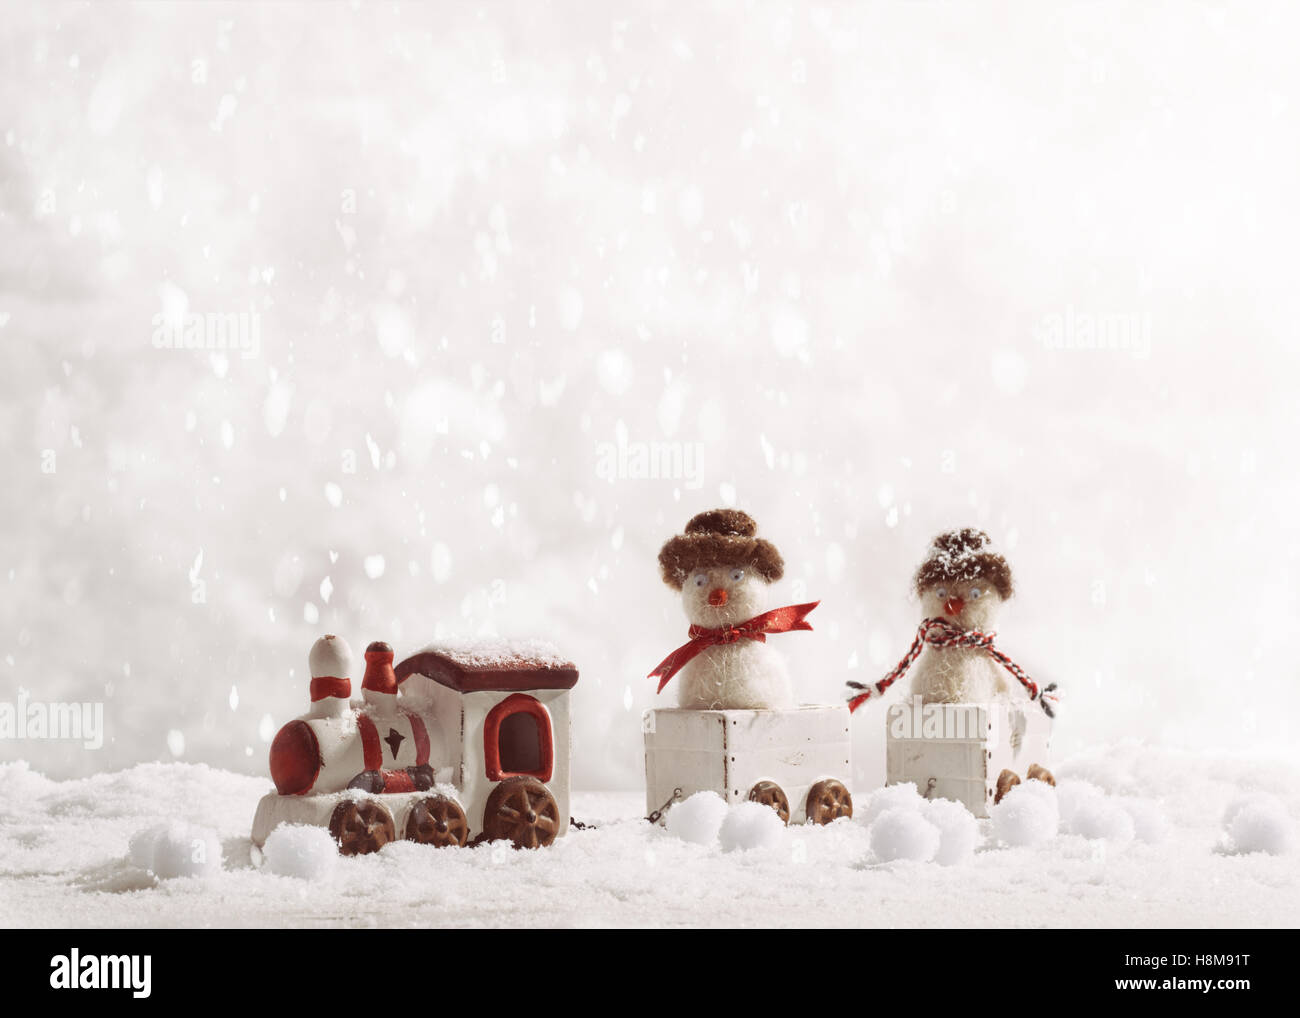 Toy train set carrying snowmen in winter setting Stock Photo